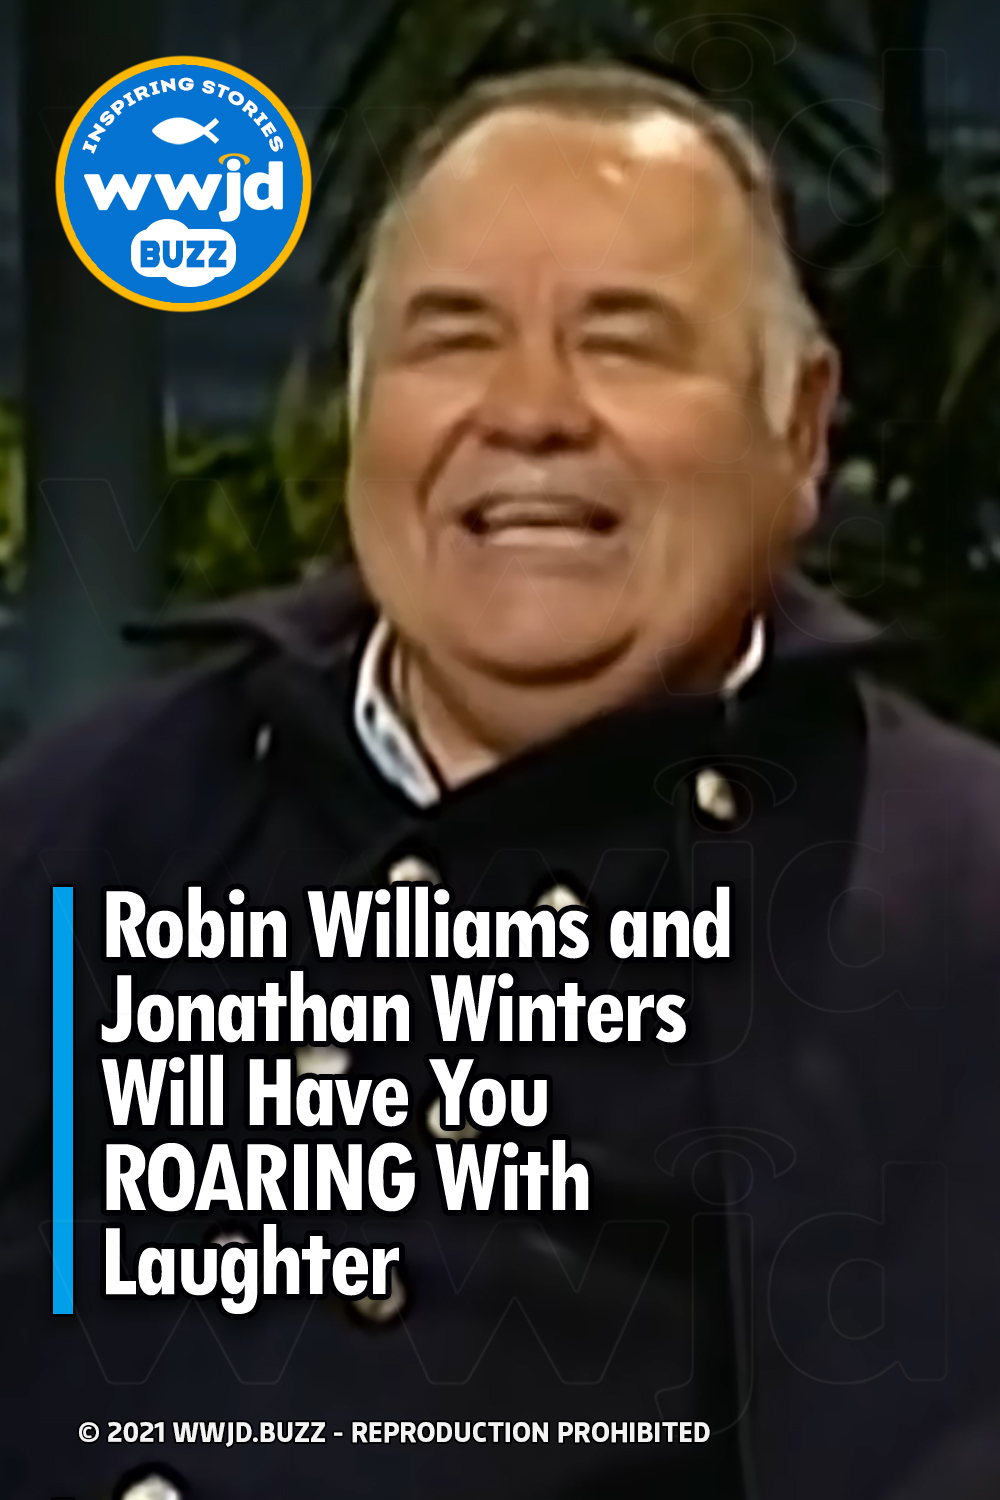 Robin Williams and Jonathan Winters Will Have You ROARING With Laughter